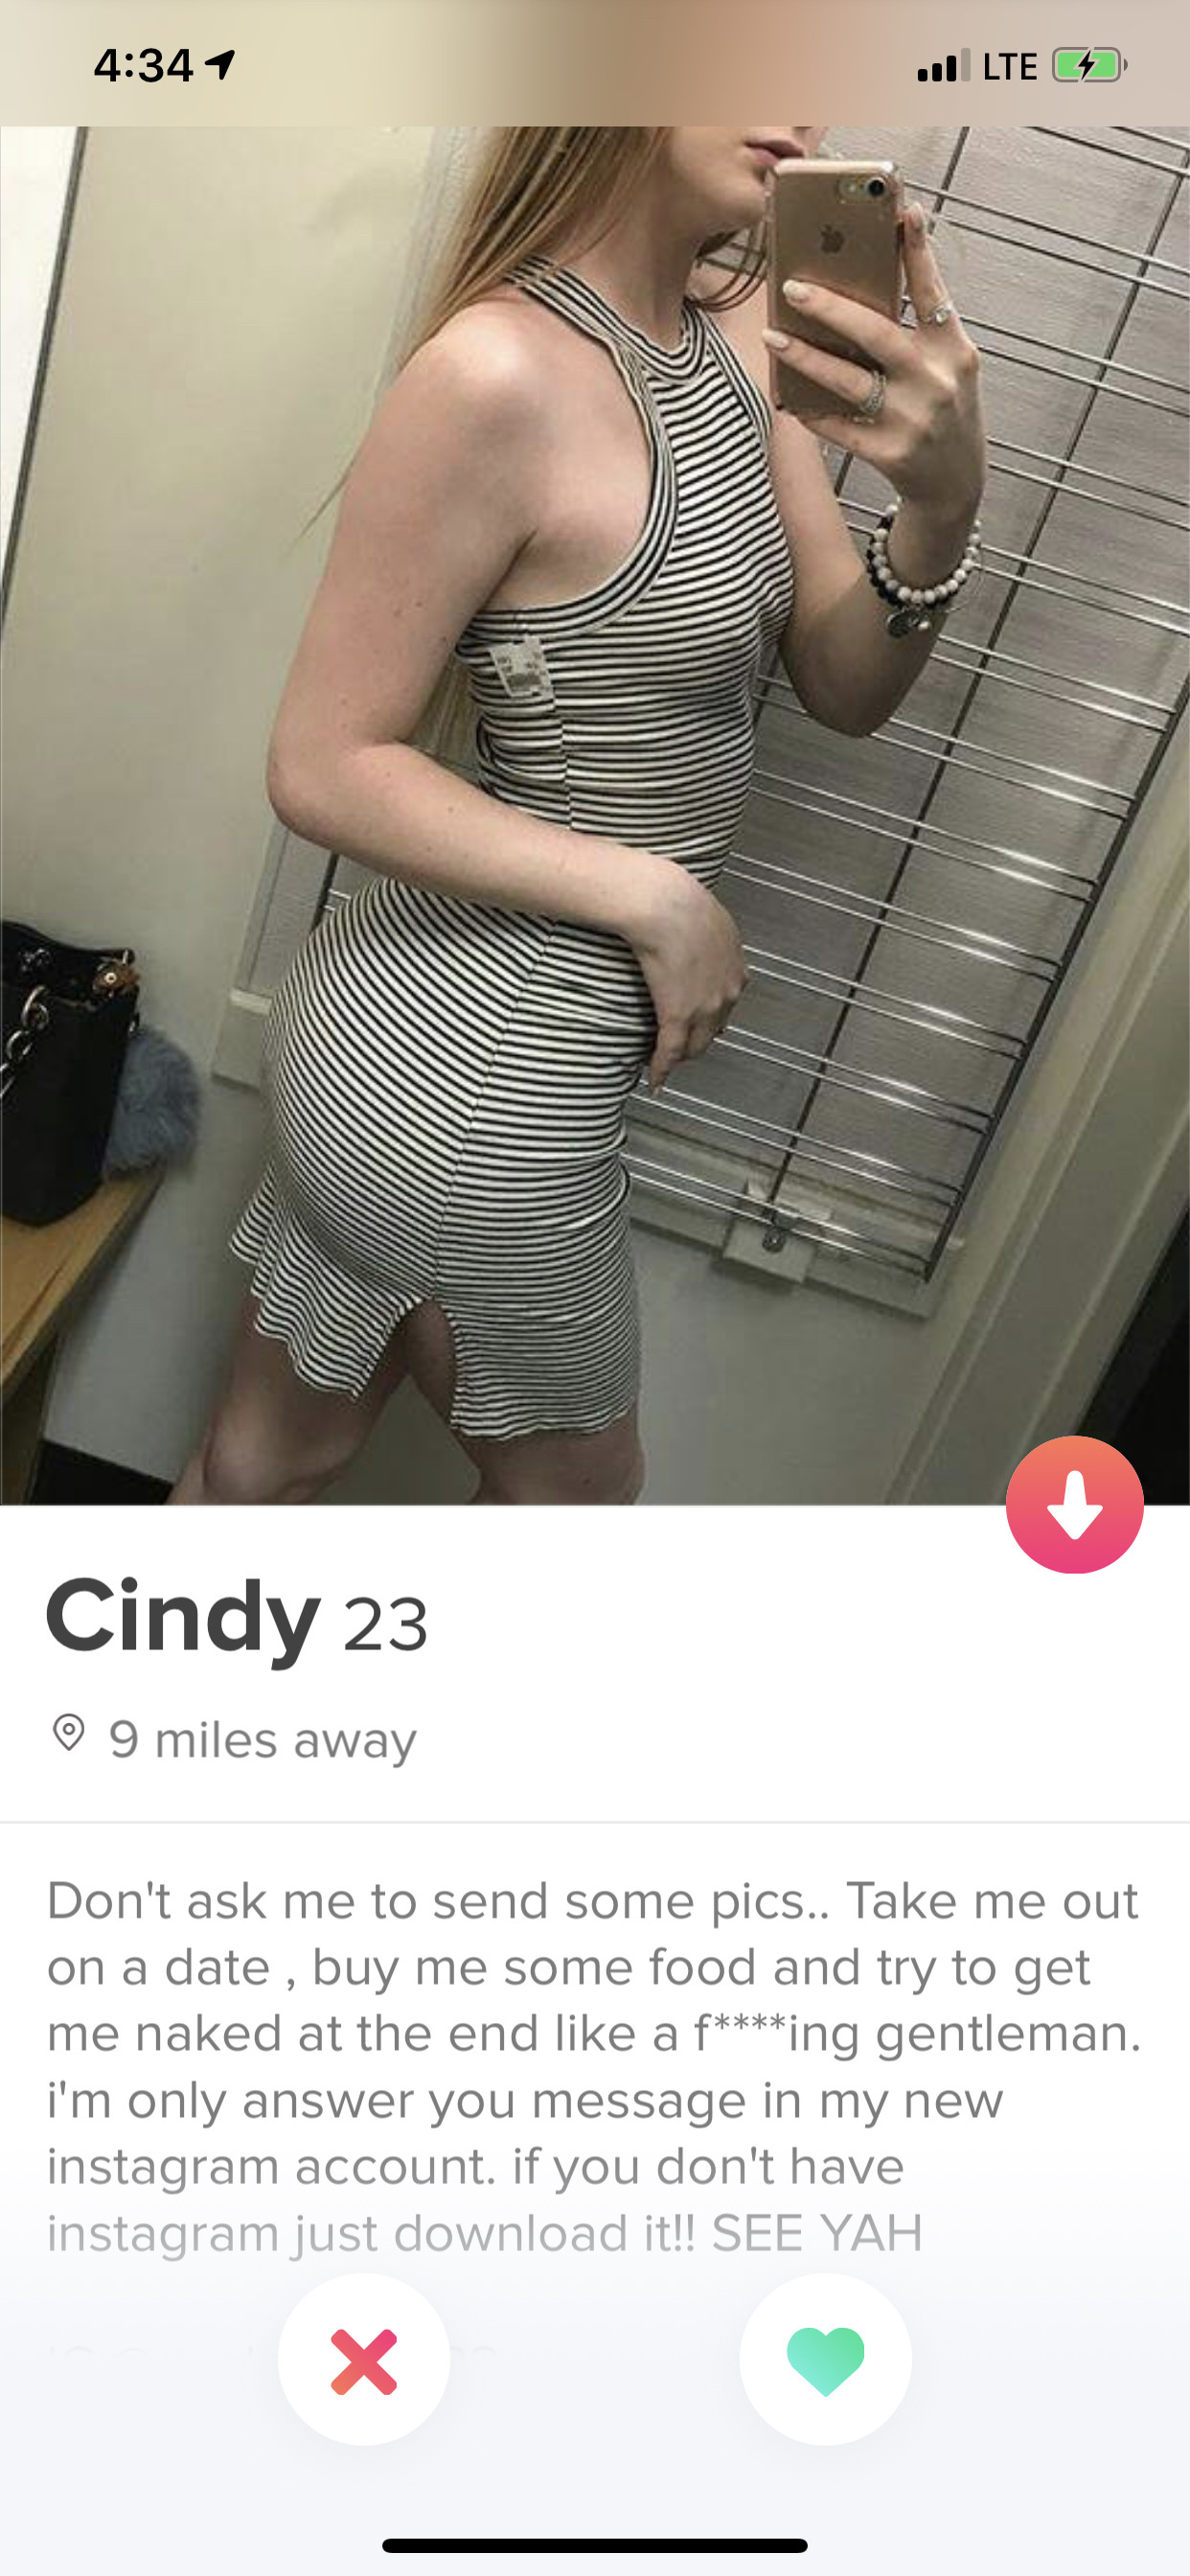 tinder - muscle - Lte Cindy 23 9 miles away Don't ask me to send some pics. Take me out on a date. buy me some food and try to get me naked at the end a f ing gentleman i'm only answer you message in my new instagram account if you don't have Instagram ju